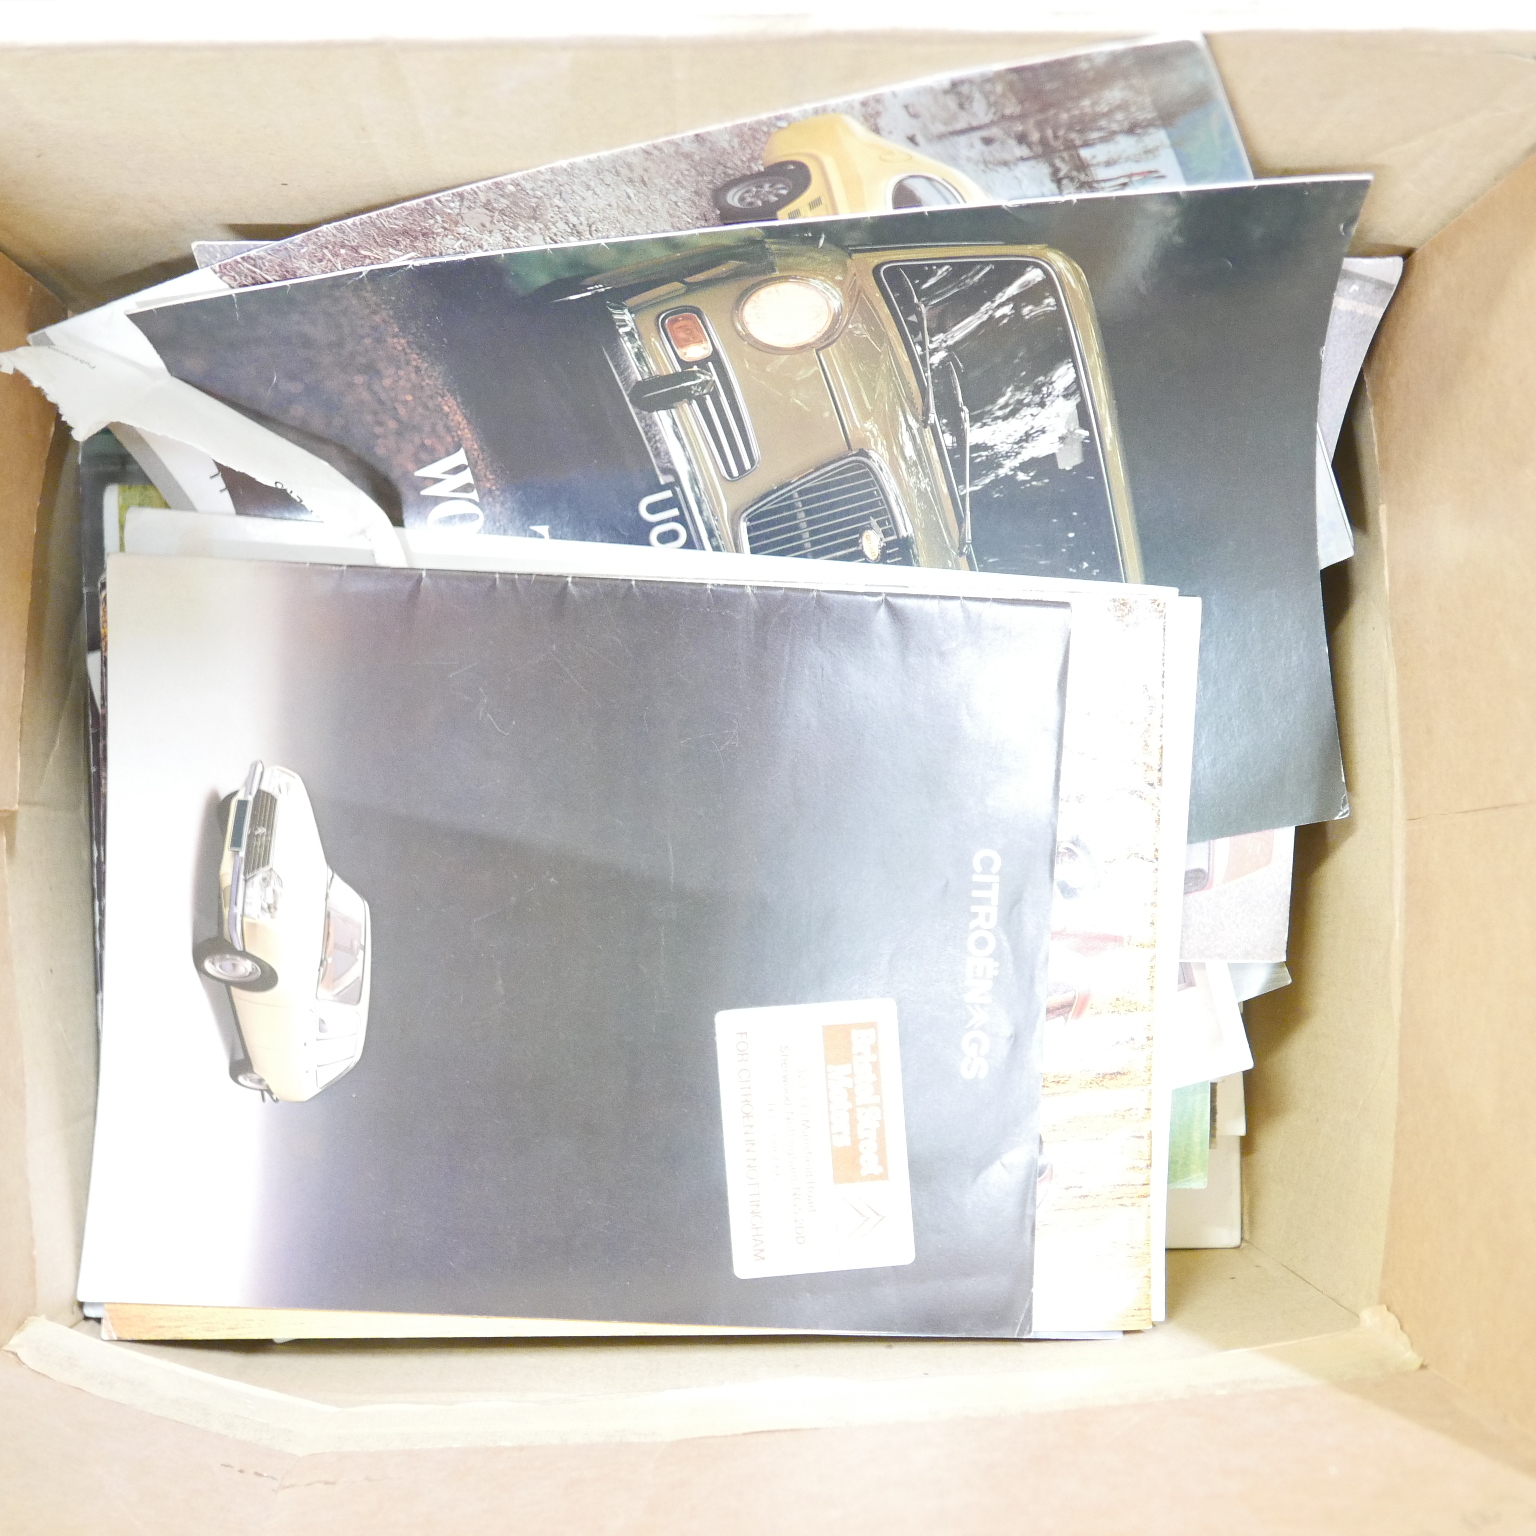 A collection of car brochures including vintage Ford Capri and a box of New book of the road, - Image 2 of 3